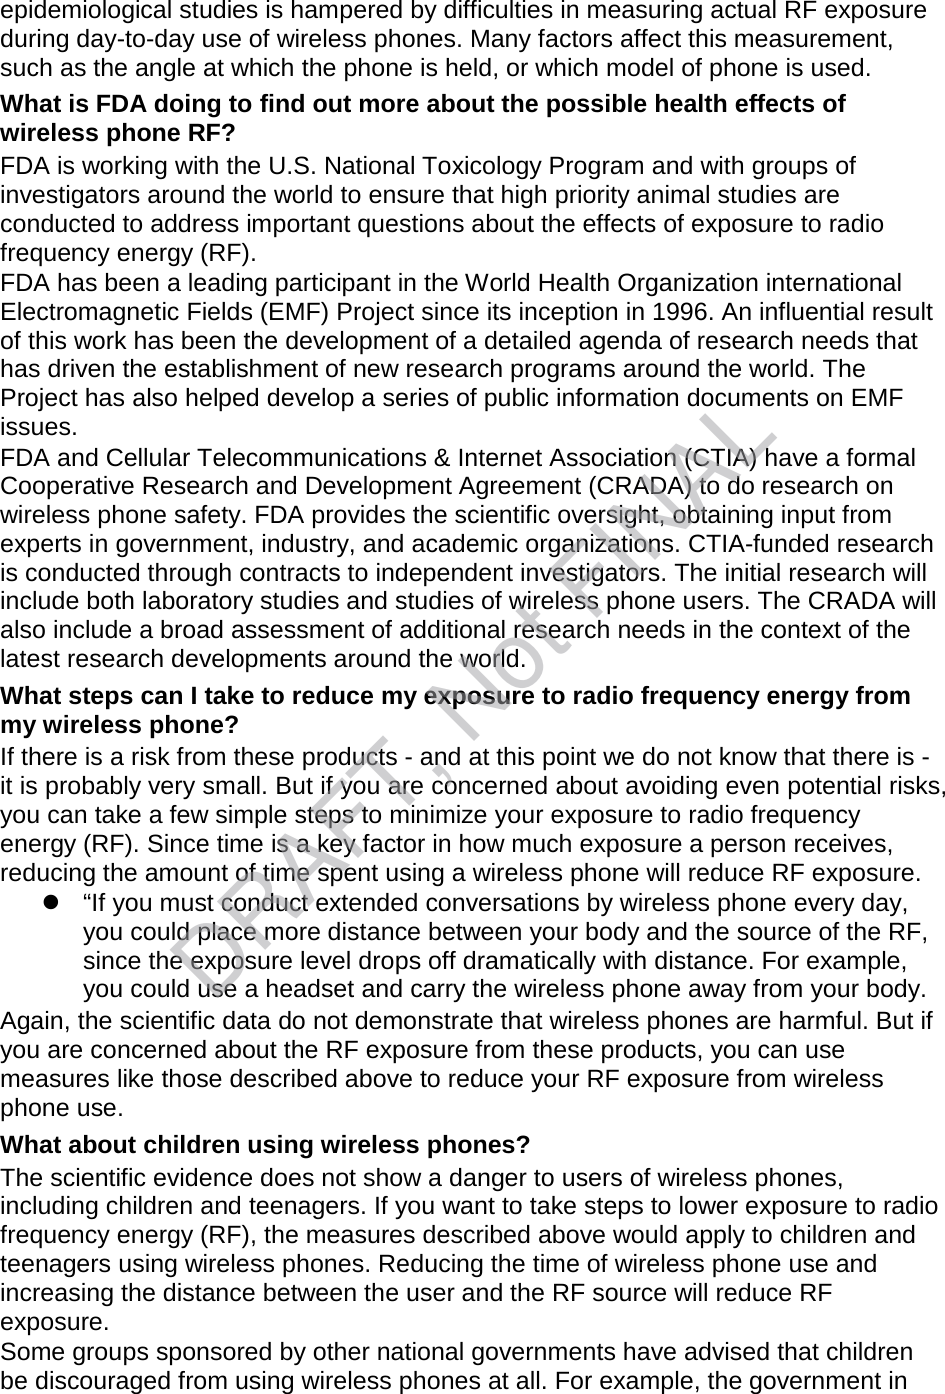 epidemiological studies is hampered by difficulties in measuring actual RF exposure during day-to-day use of wireless phones. Many factors affect this measurement, such as the angle at which the phone is held, or which model of phone is used. What is FDA doing to find out more about the possible health effects of wireless phone RF? FDA is working with the U.S. National Toxicology Program and with groups of investigators around the world to ensure that high priority animal studies are conducted to address important questions about the effects of exposure to radio frequency energy (RF). FDA has been a leading participant in the World Health Organization international Electromagnetic Fields (EMF) Project since its inception in 1996. An influential result of this work has been the development of a detailed agenda of research needs that has driven the establishment of new research programs around the world. The Project has also helped develop a series of public information documents on EMF issues. FDA and Cellular Telecommunications &amp; Internet Association (CTIA) have a formal Cooperative Research and Development Agreement (CRADA) to do research on wireless phone safety. FDA provides the scientific oversight, obtaining input from experts in government, industry, and academic organizations. CTIA-funded research is conducted through contracts to independent investigators. The initial research will include both laboratory studies and studies of wireless phone users. The CRADA will also include a broad assessment of additional research needs in the context of the latest research developments around the world. What steps can I take to reduce my exposure to radio frequency energy from my wireless phone? If there is a risk from these products - and at this point we do not know that there is - it is probably very small. But if you are concerned about avoiding even potential risks, you can take a few simple steps to minimize your exposure to radio frequency energy (RF). Since time is a key factor in how much exposure a person receives, reducing the amount of time spent using a wireless phone will reduce RF exposure.  “If you must conduct extended conversations by wireless phone every day, you could place more distance between your body and the source of the RF, since the exposure level drops off dramatically with distance. For example, you could use a headset and carry the wireless phone away from your body. Again, the scientific data do not demonstrate that wireless phones are harmful. But if you are concerned about the RF exposure from these products, you can use measures like those described above to reduce your RF exposure from wireless phone use. What about children using wireless phones? The scientific evidence does not show a danger to users of wireless phones, including children and teenagers. If you want to take steps to lower exposure to radio frequency energy (RF), the measures described above would apply to children and teenagers using wireless phones. Reducing the time of wireless phone use and increasing the distance between the user and the RF source will reduce RF exposure. Some groups sponsored by other national governments have advised that children be discouraged from using wireless phones at all. For example, the government in DRAFT, Not FINAL